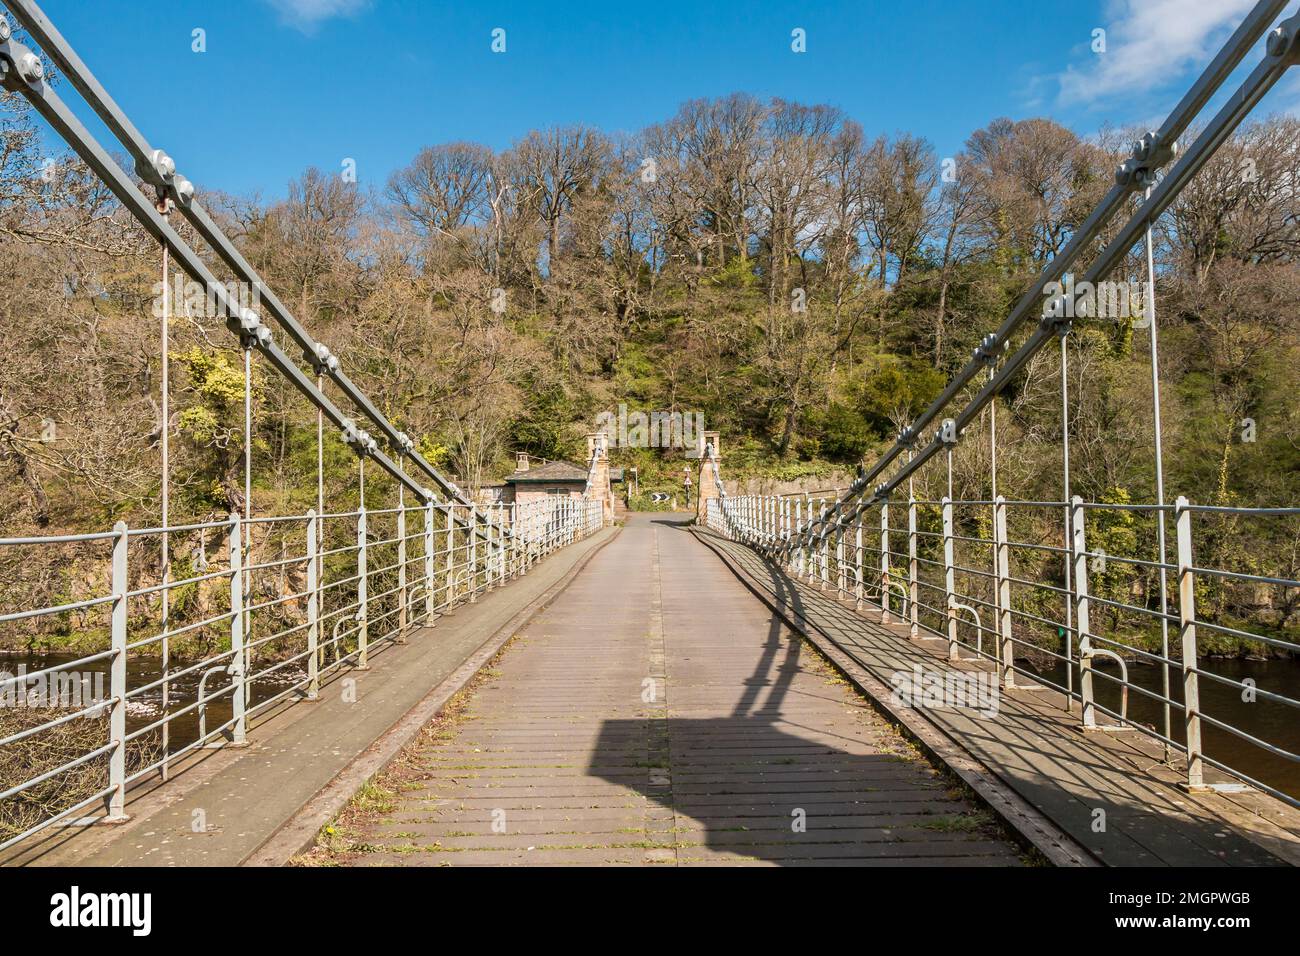 The Grade II* listed and scheduled ancient monument of Whorlton Suspension bridge over the River Tees, County Durham, UK Stock Photo